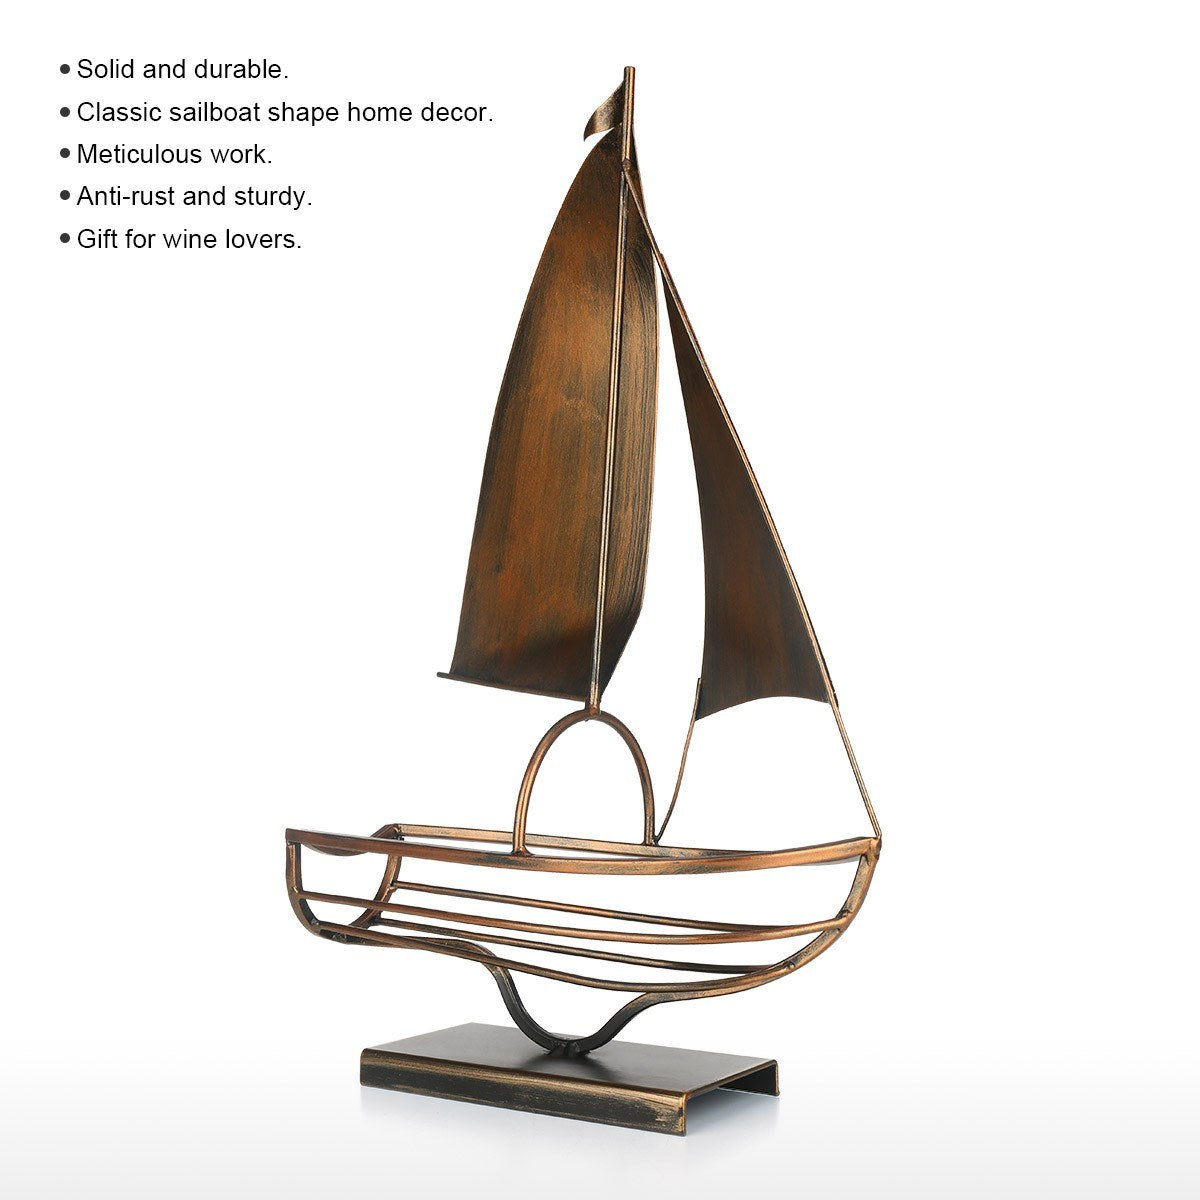 A boat turns into a great and decorative single wine bottle holder!